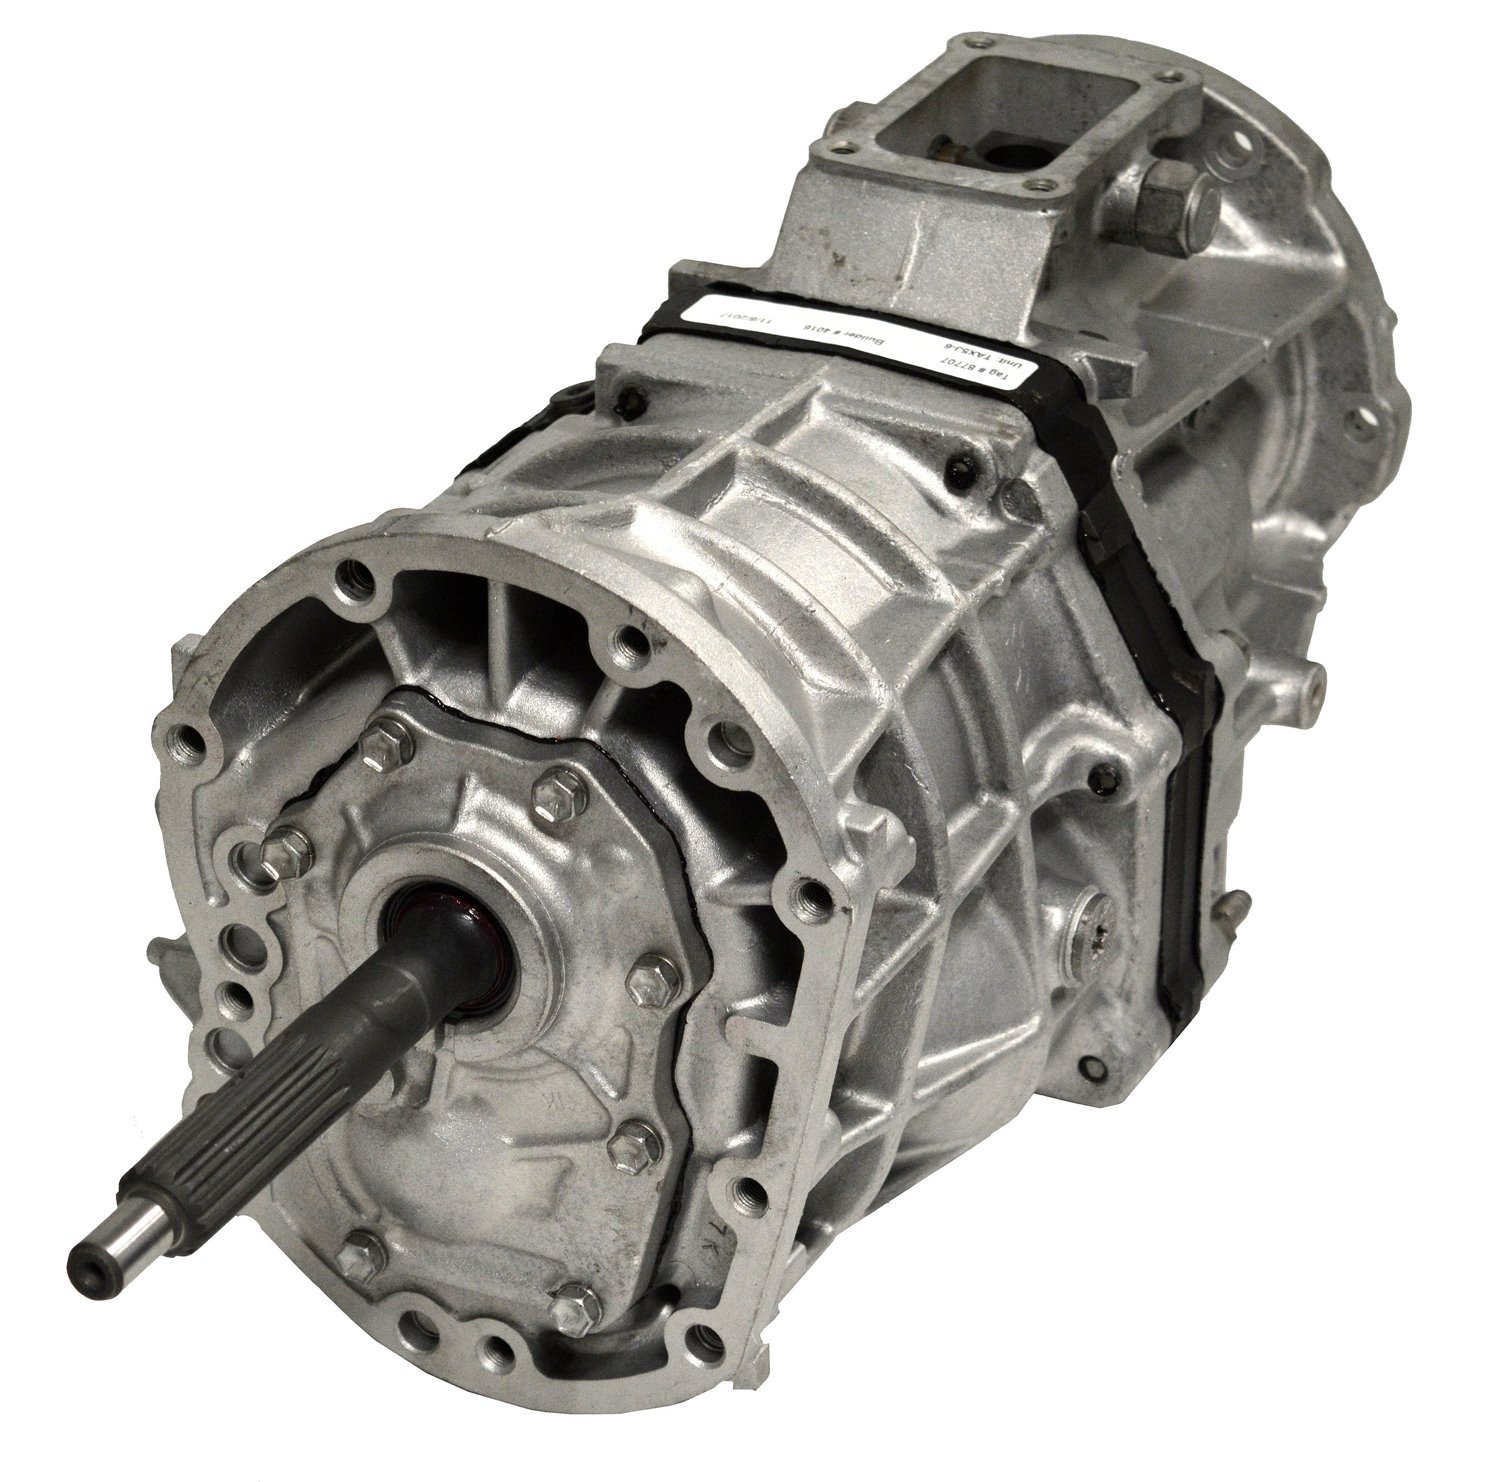 Remanufactured AX5 Manual Transmission for Jeep 97-00 Cherokee, 4x4, 5 Speed